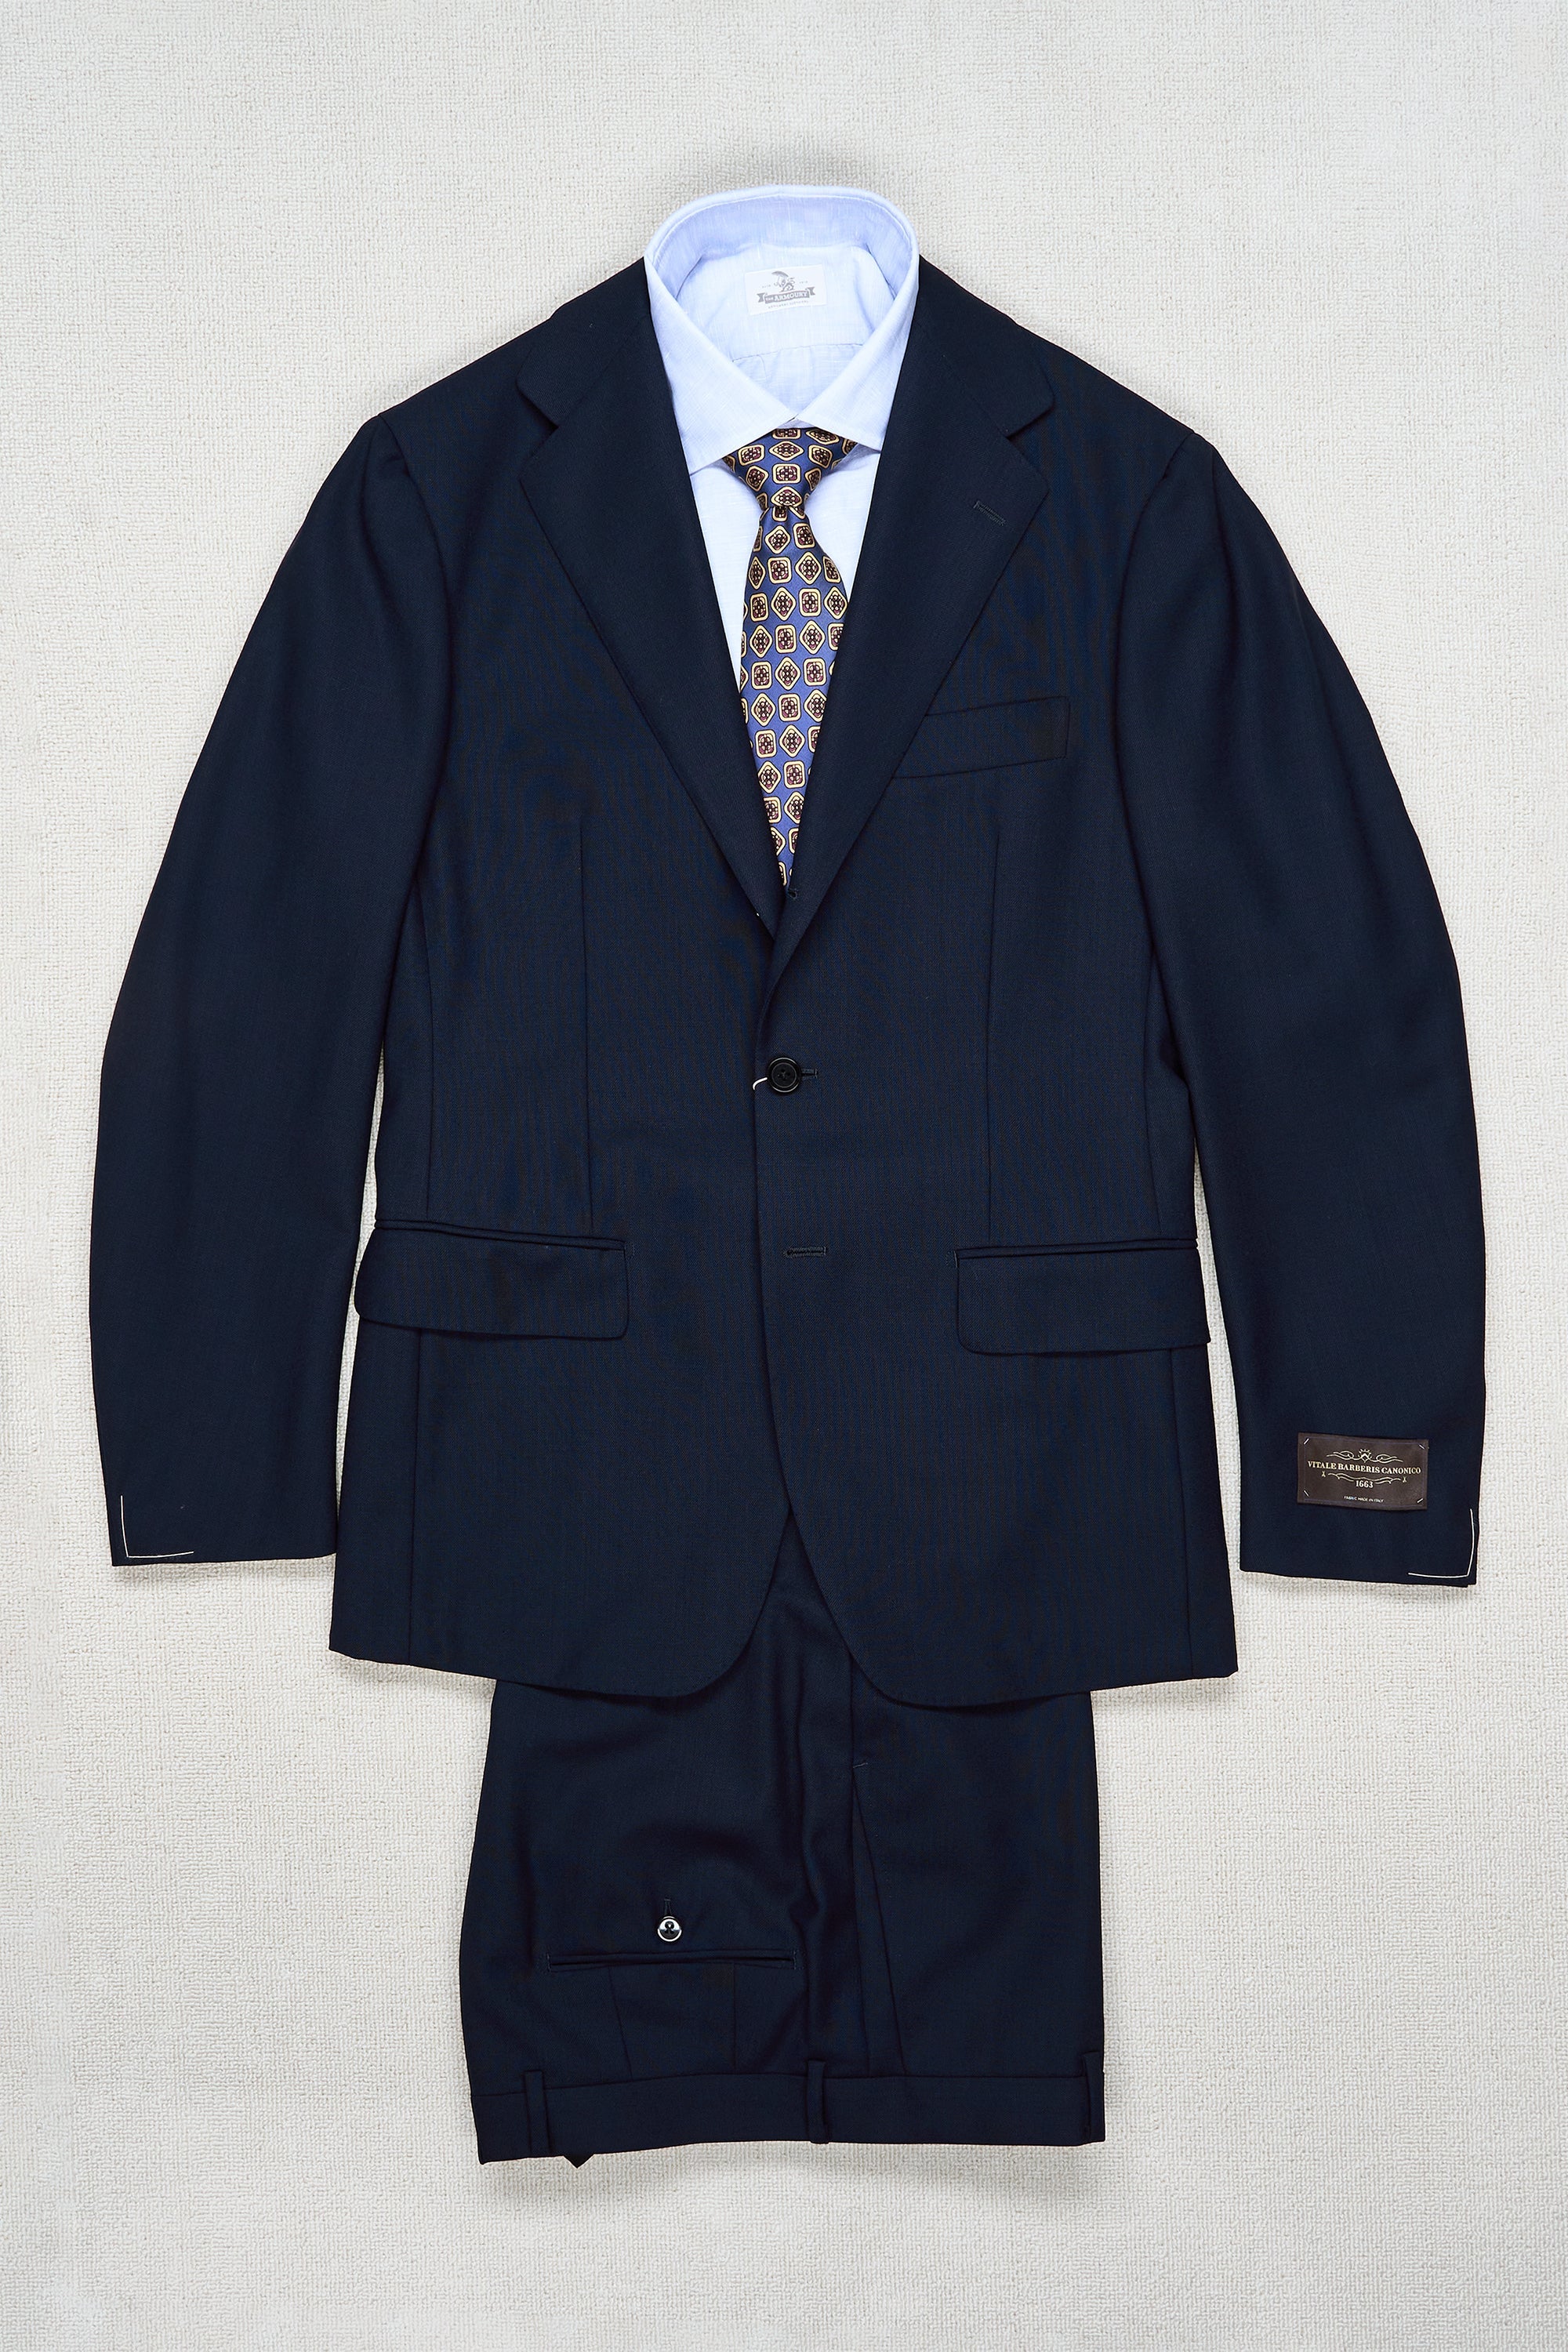 The Armoury by Ring Jacket Model 3A Navy 4-ply Wool Suit